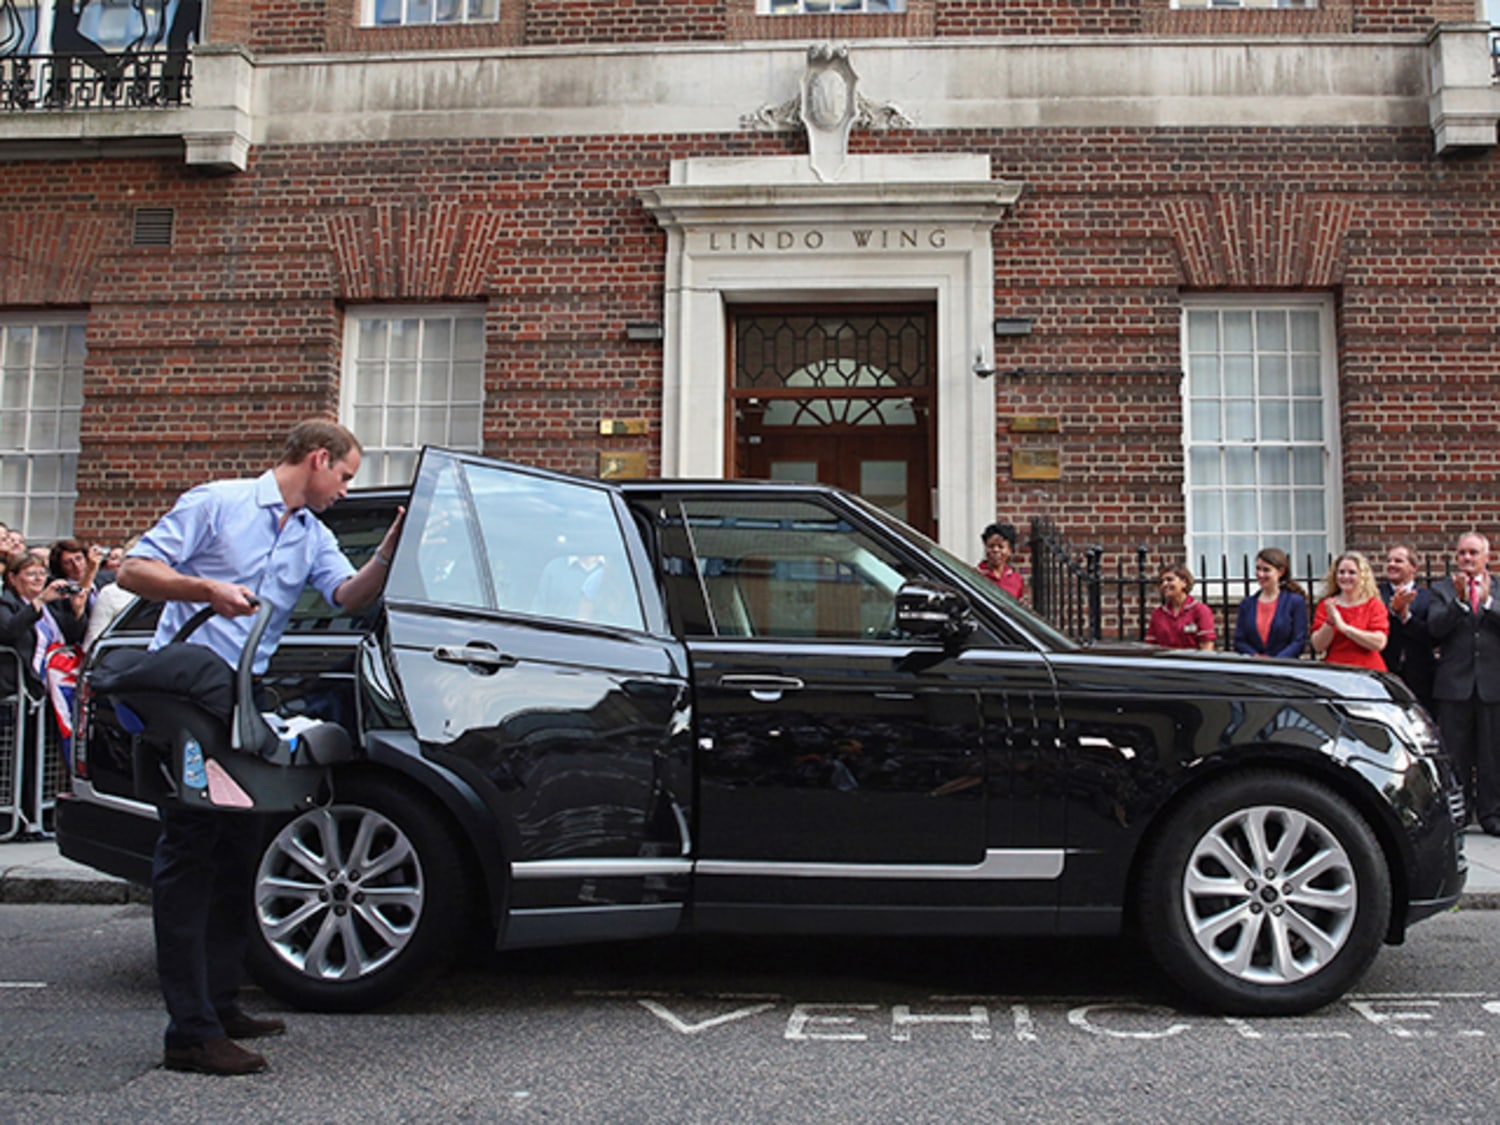 You Can Buy One of Her Majesty's Royal Range Rovers